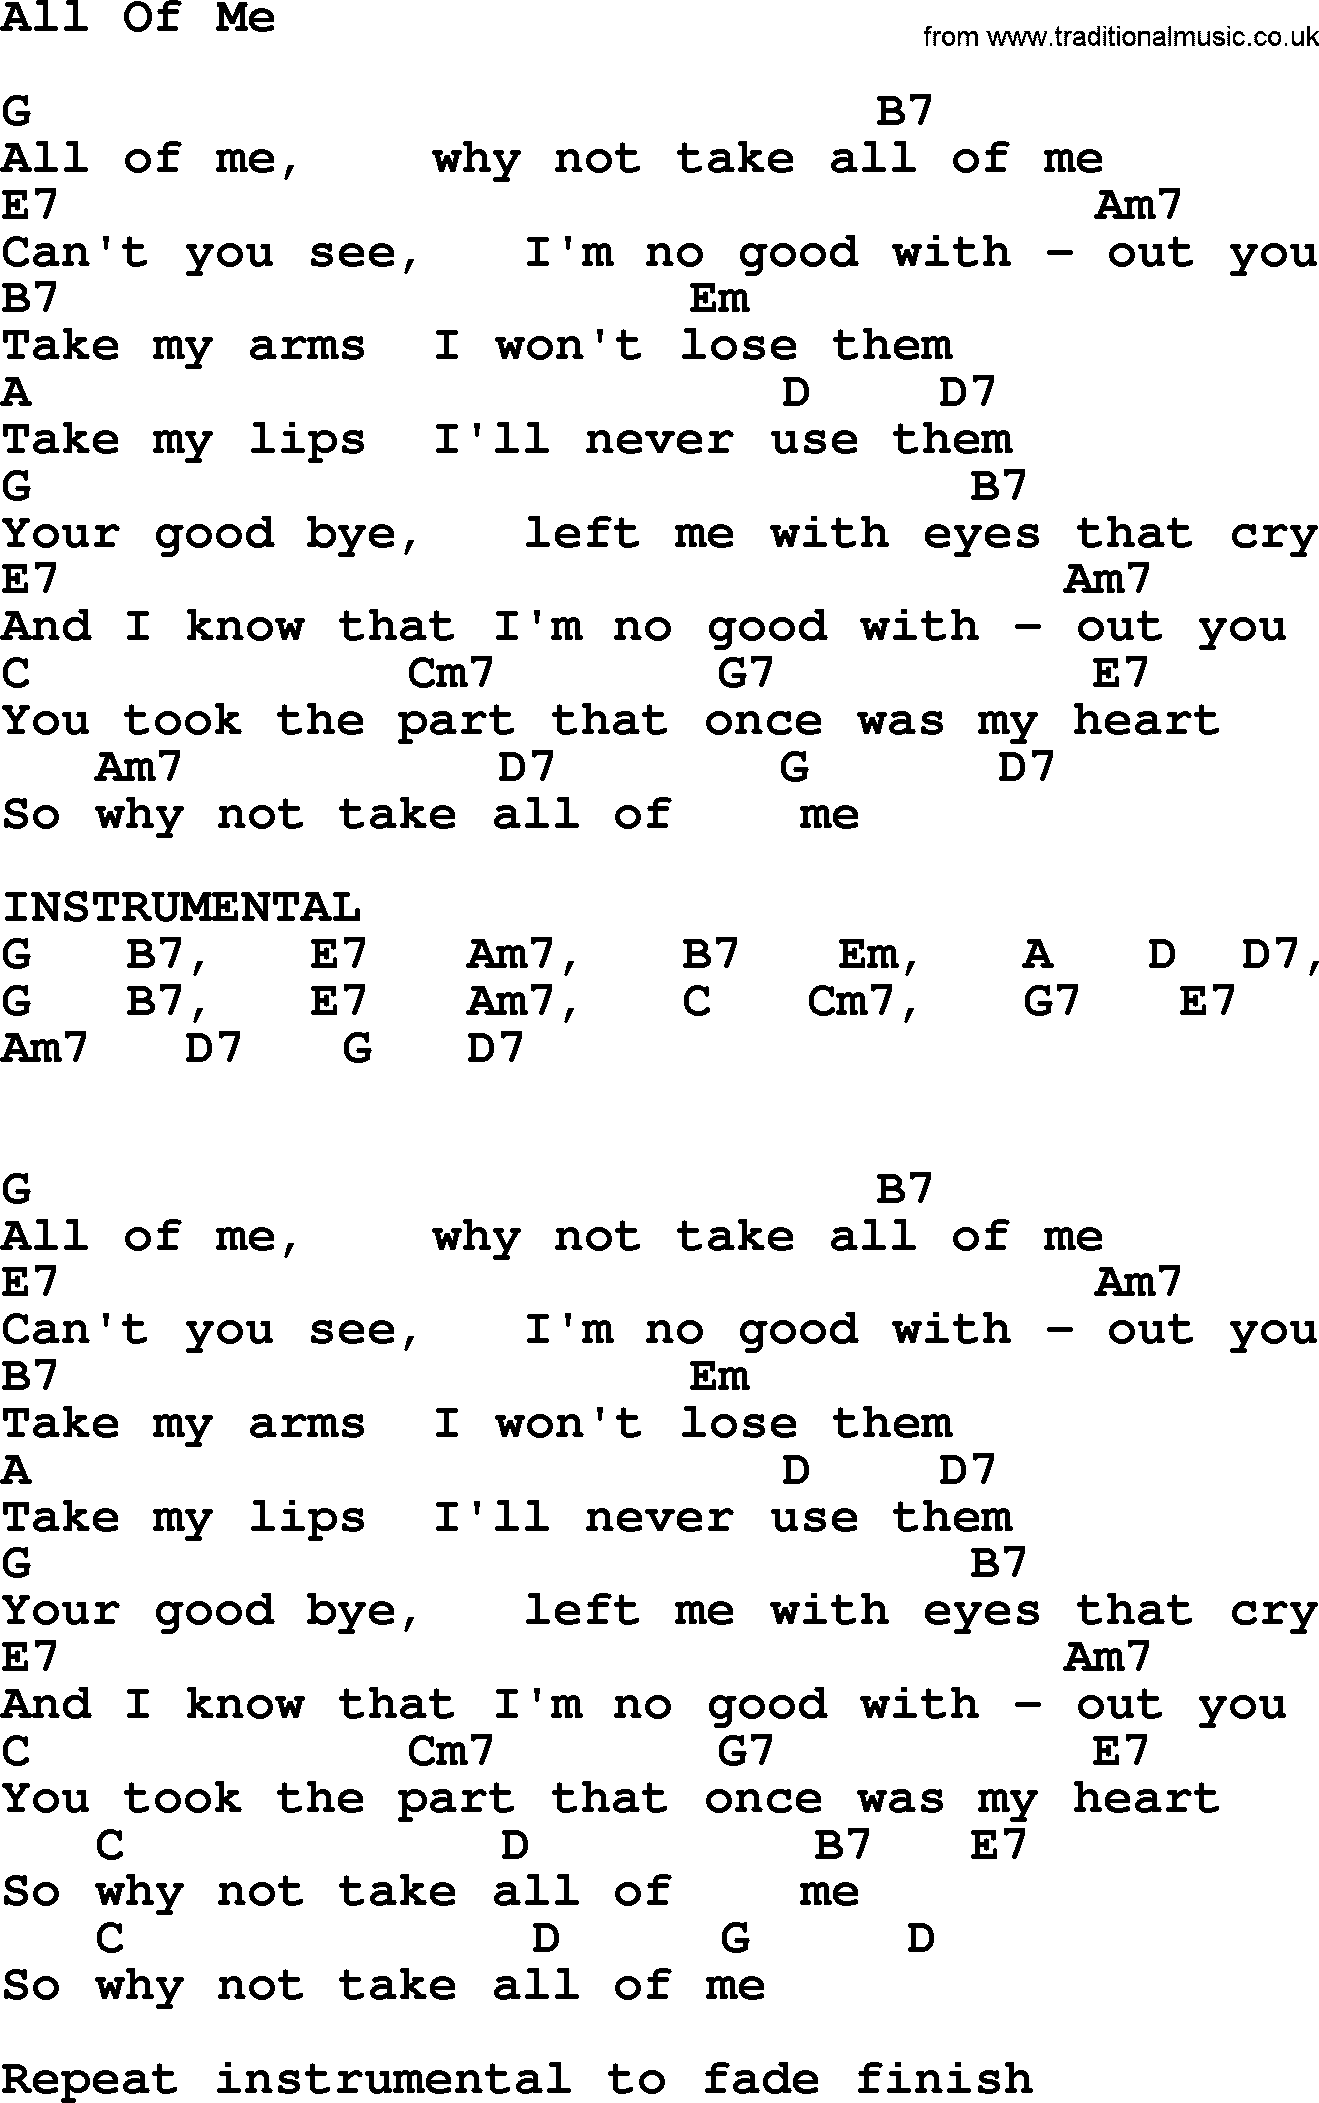 Willie Nelson song: All Of Me, lyrics and chords